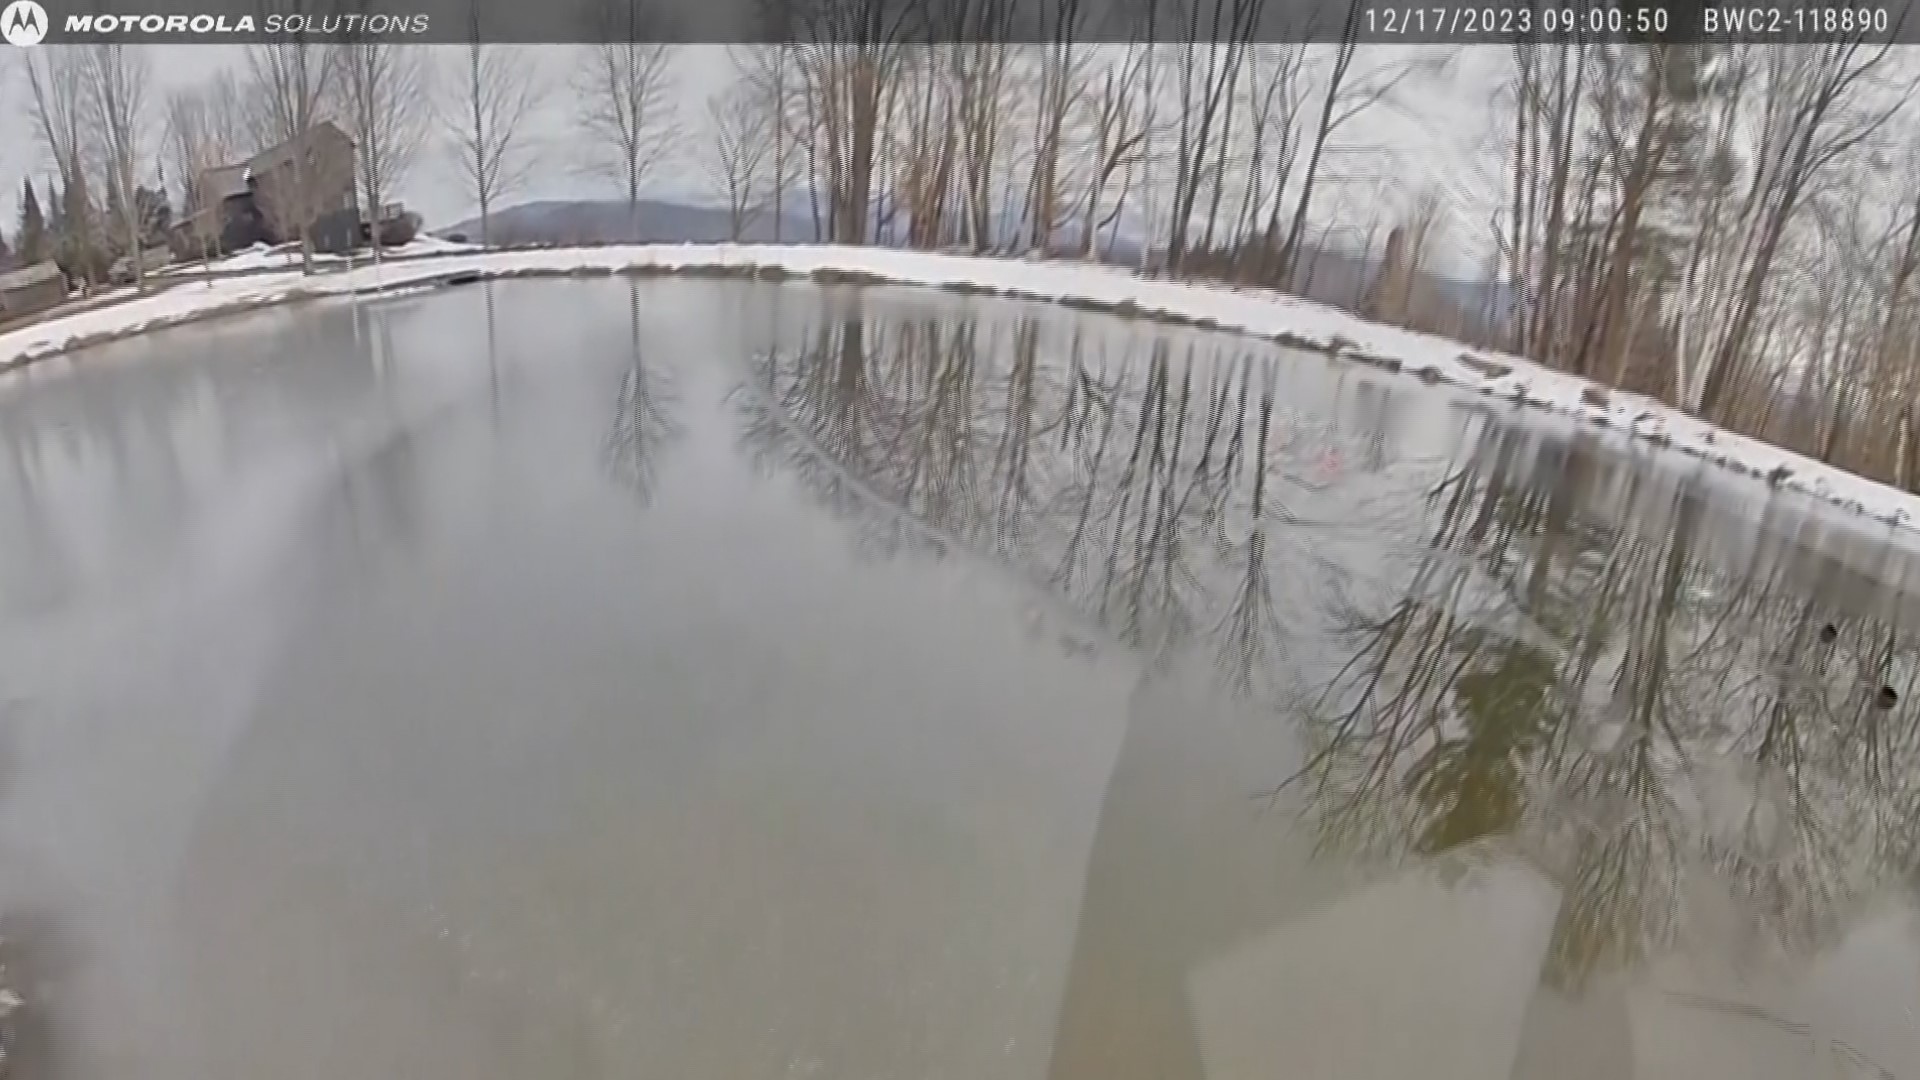 A Vermont State trooper plunged into a frigid pond and pulled out an 8-year-old girl who had fallen through the ice while playing with siblings.